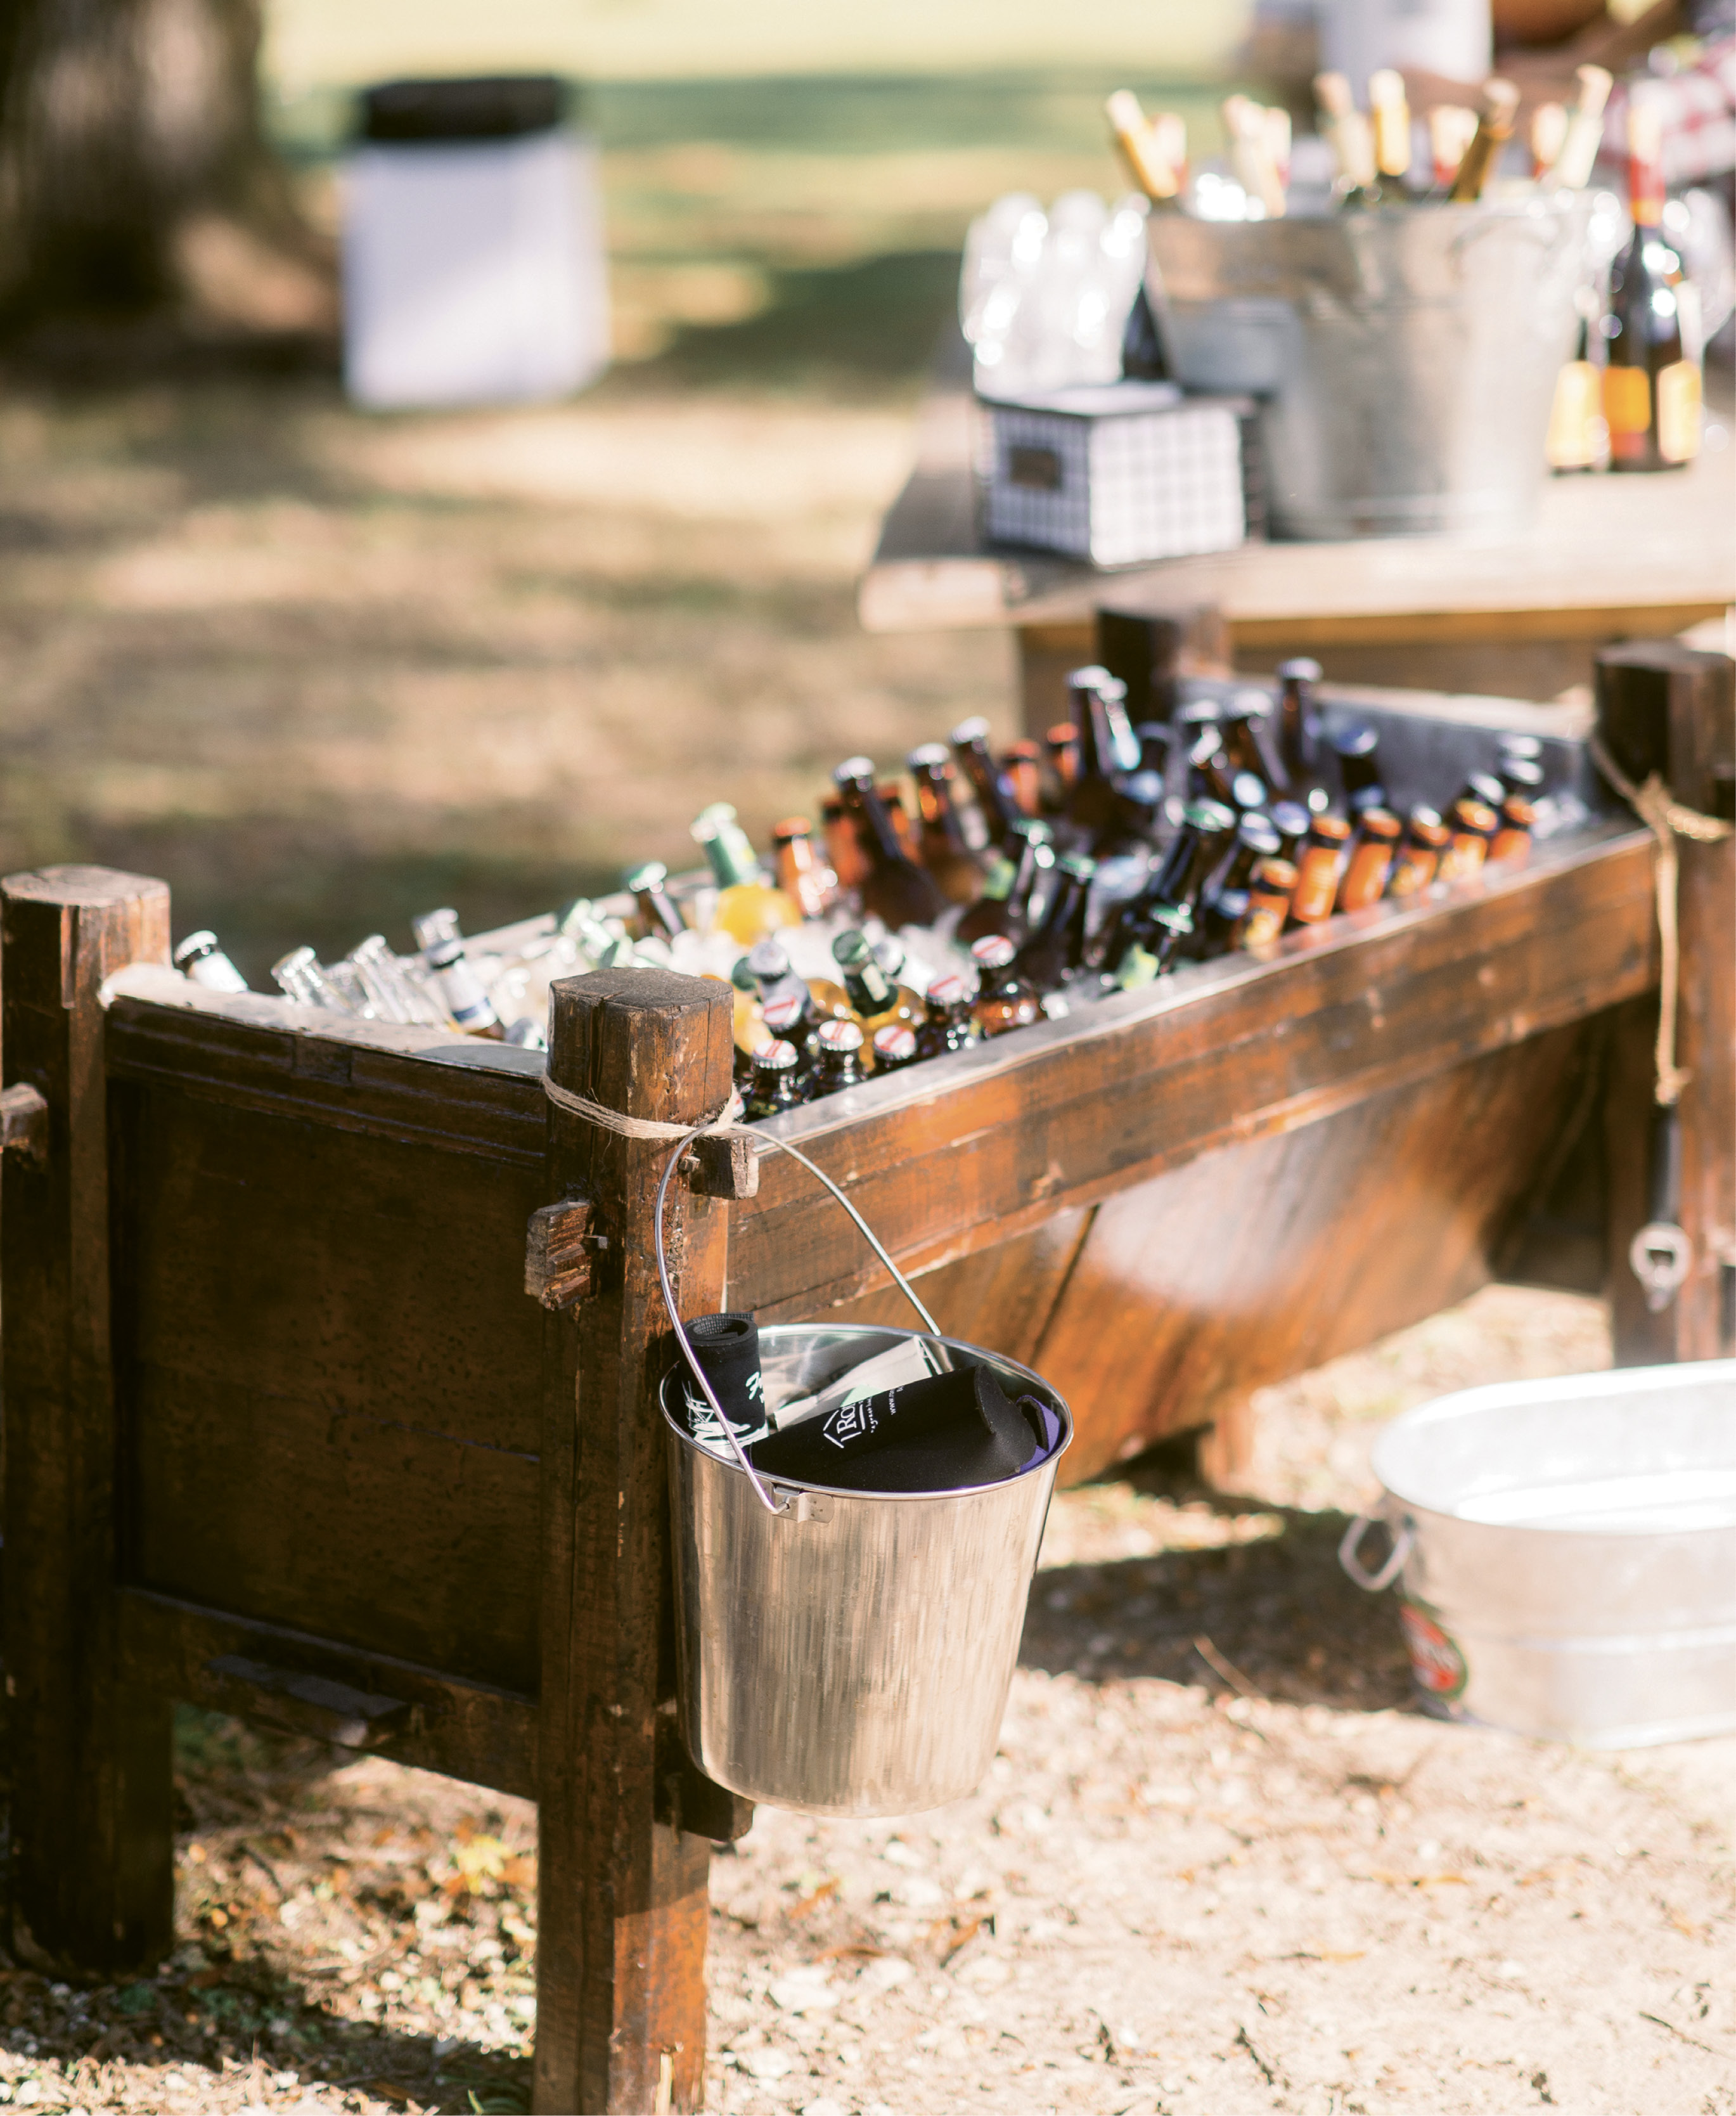 Bottoms Up: A wooden trough rented from Snyder Events kept the serve-yourself beer stash iced while a galvanized pail secured with rope held koozies and added to the day’s rustic aesthetic.